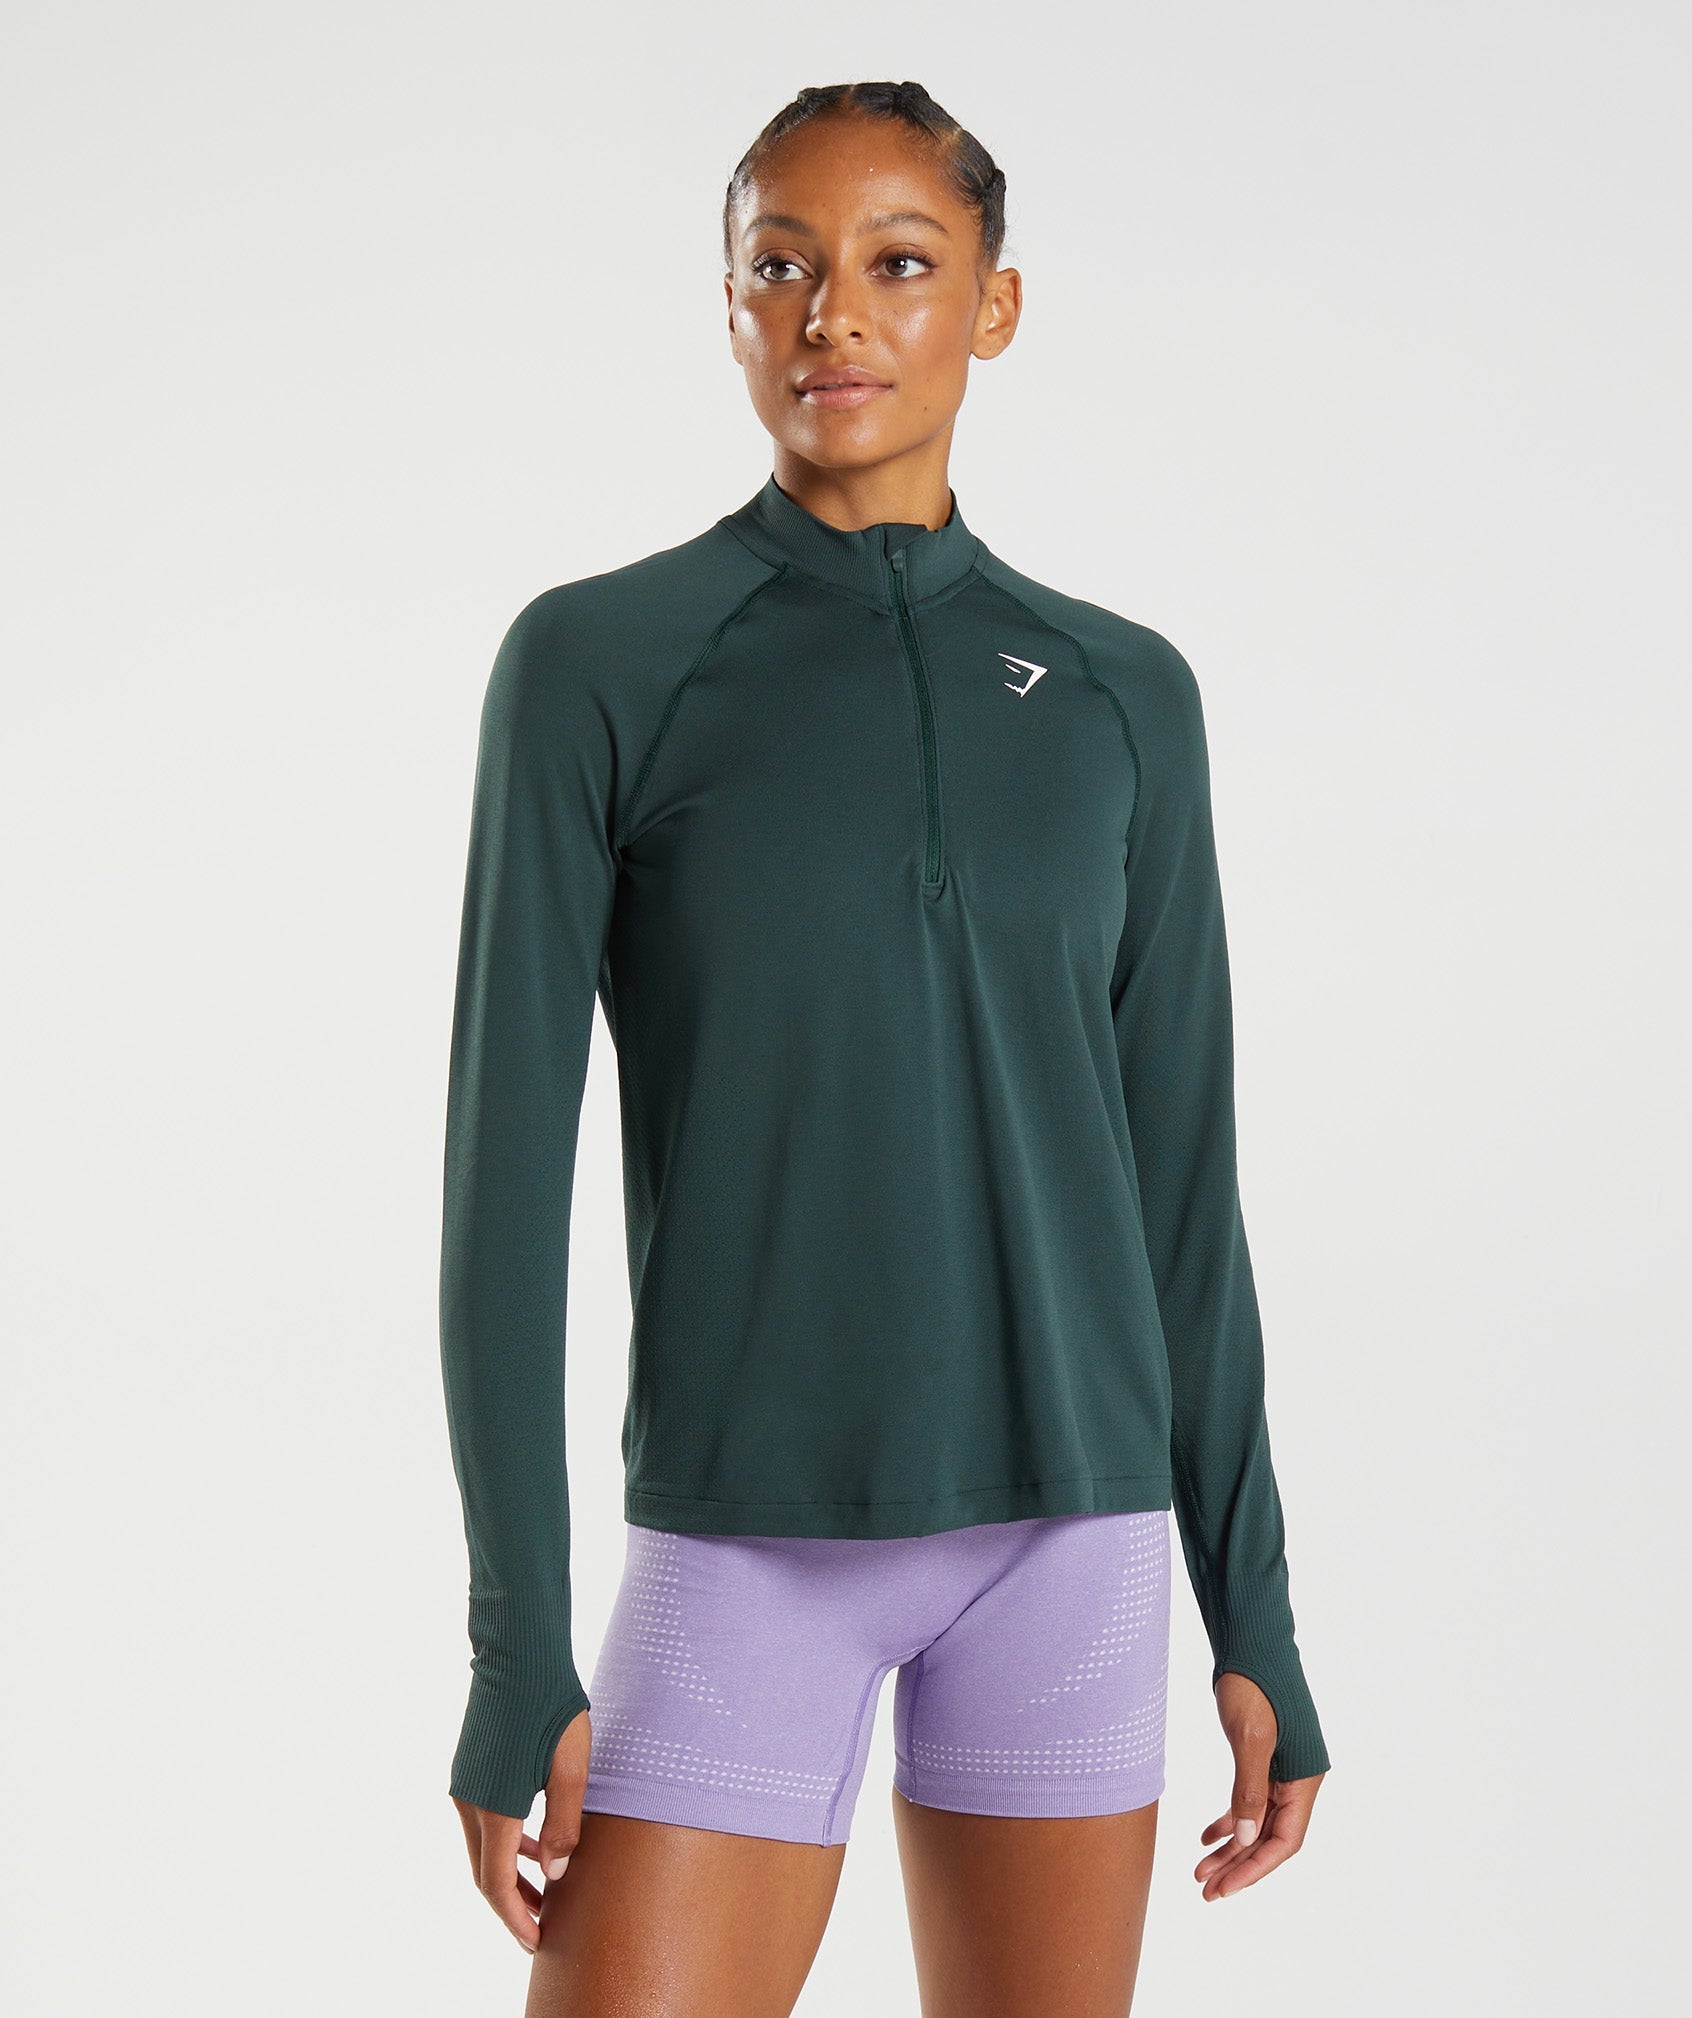 Vital Seamless 1/2 Zip in {{variantColor} is out of stock